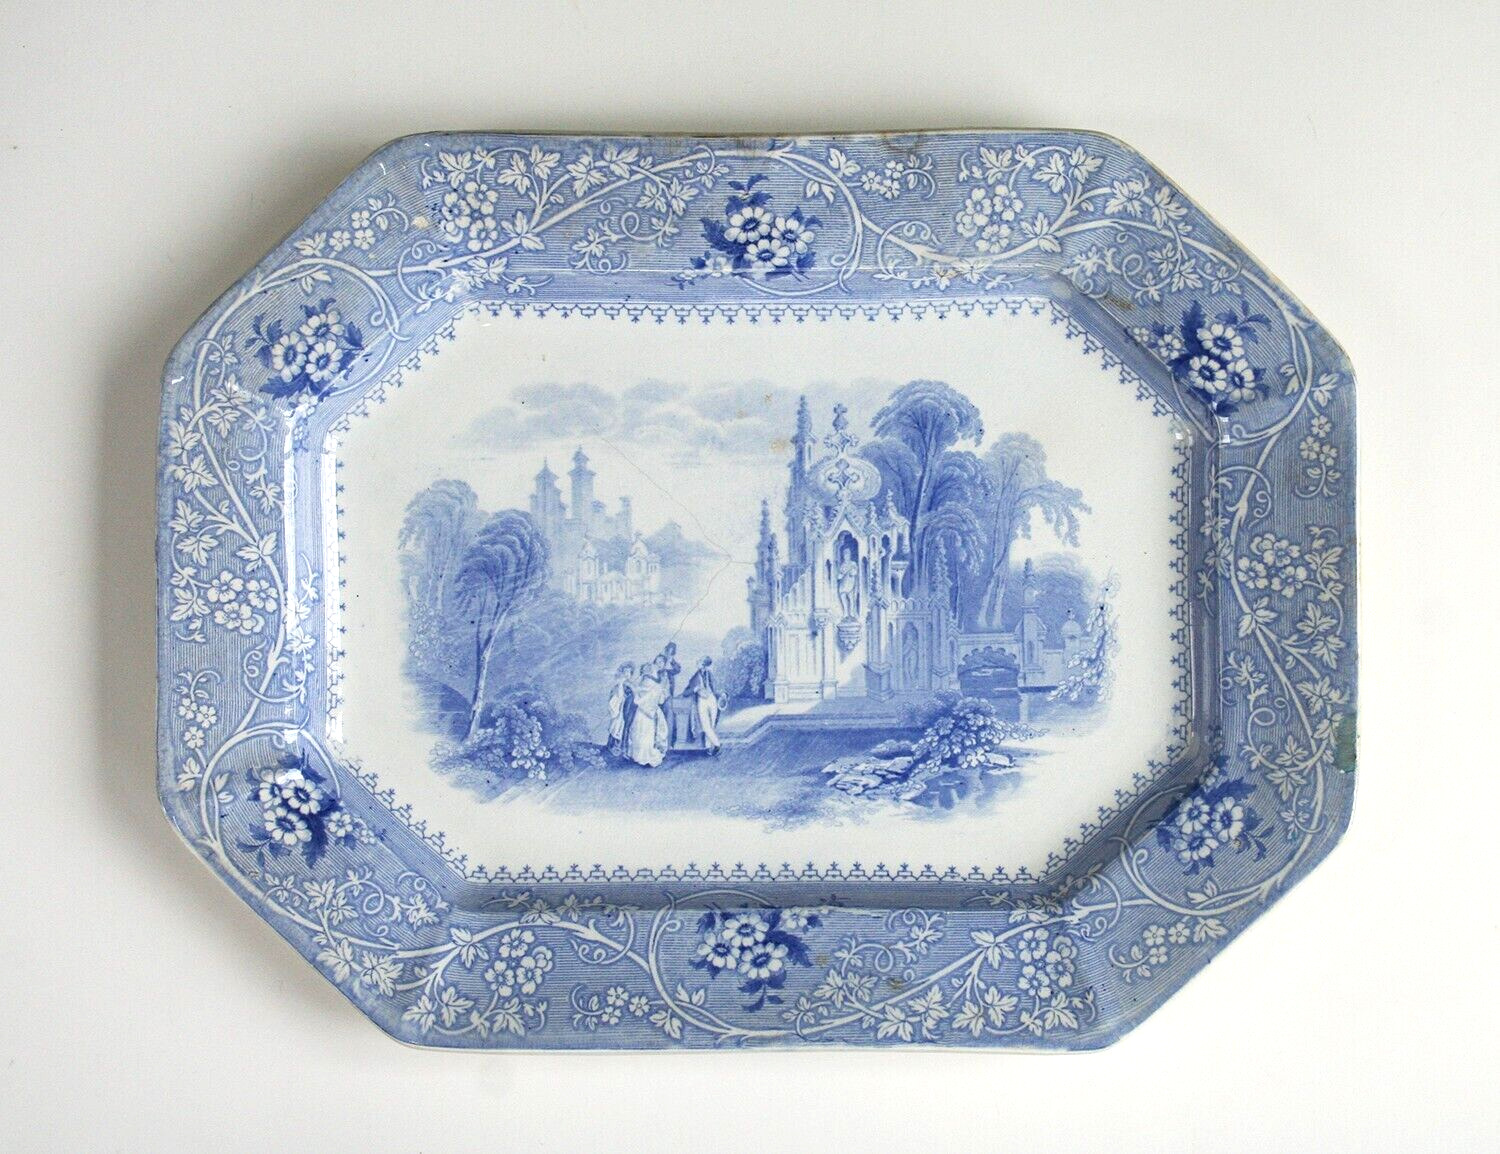 Antique Blue and White Transferware  Ironstone Platter, W. Adams & Sons